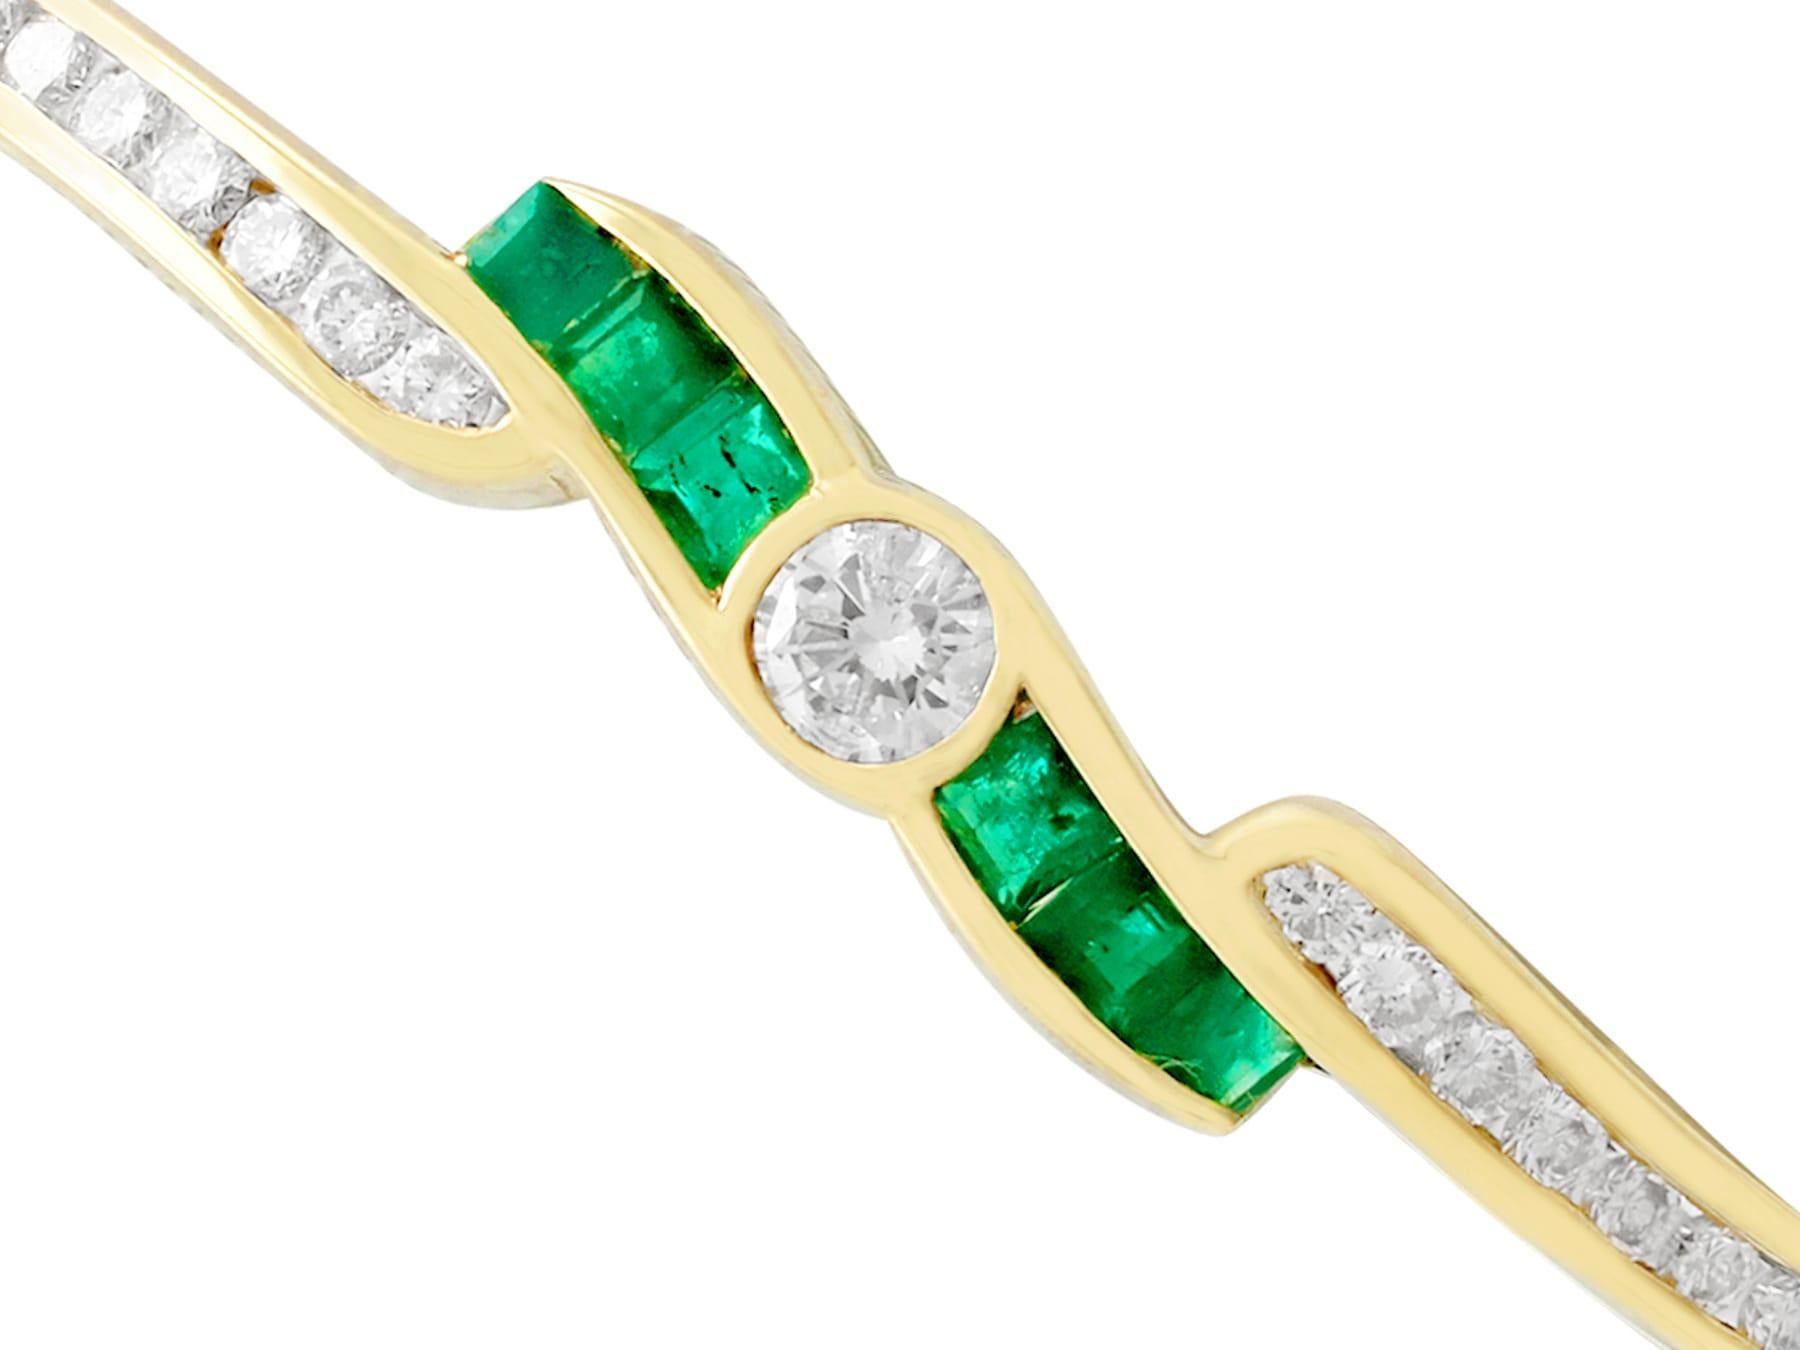 An impressive contemporary 1.50 Carat emerald and 1.36 Carat diamond, 18 karat yellow gold twist design bangle; part of our diverse gemstone jewelry collections.

This exceptional, fine and impressive emerald and diamond bangle has been crafted in